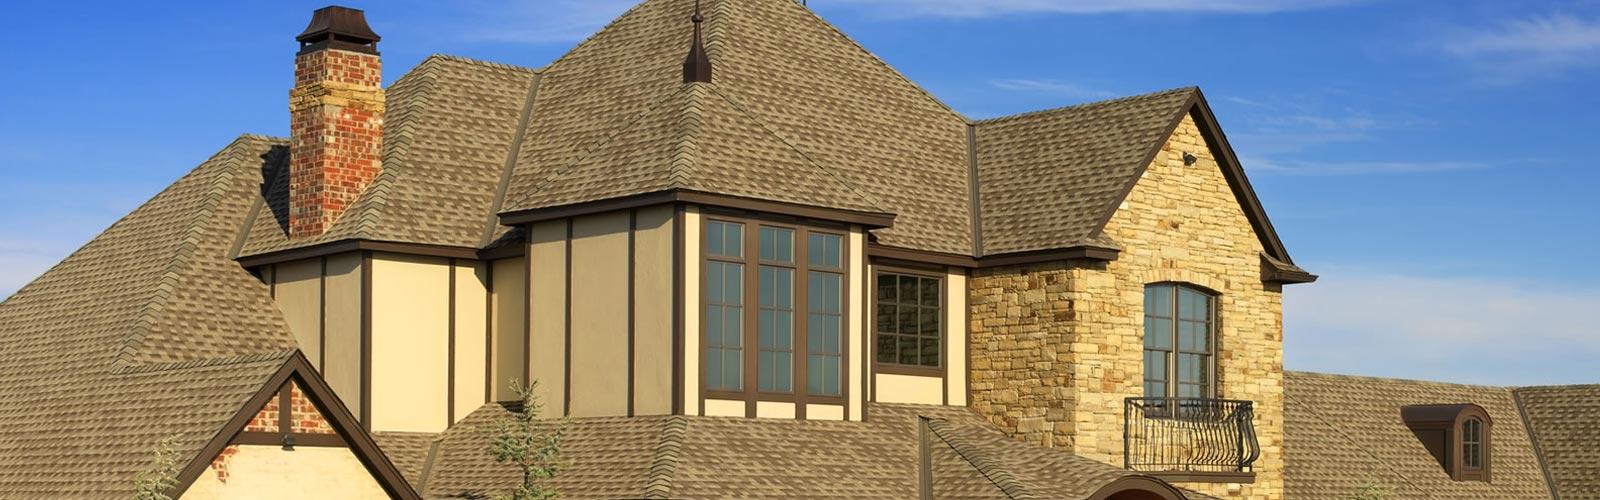 Quality Roofing Group Images